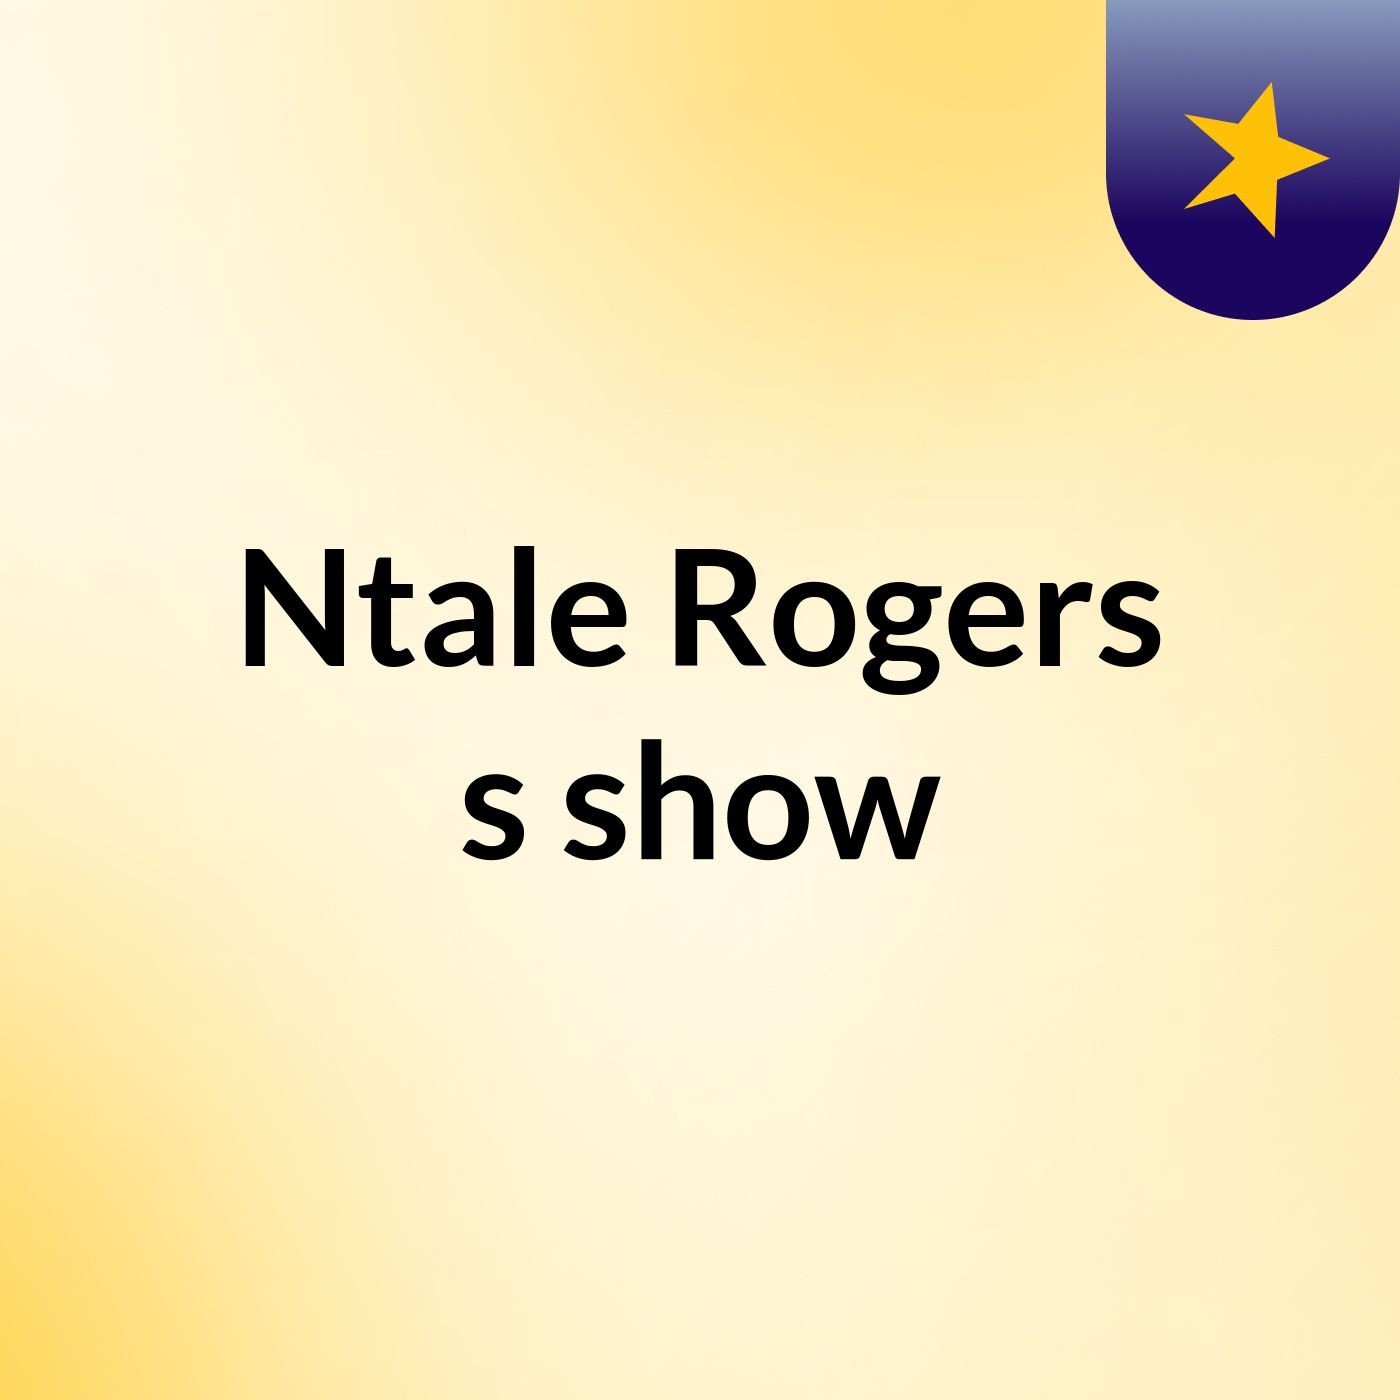 Ntale Rogers's show